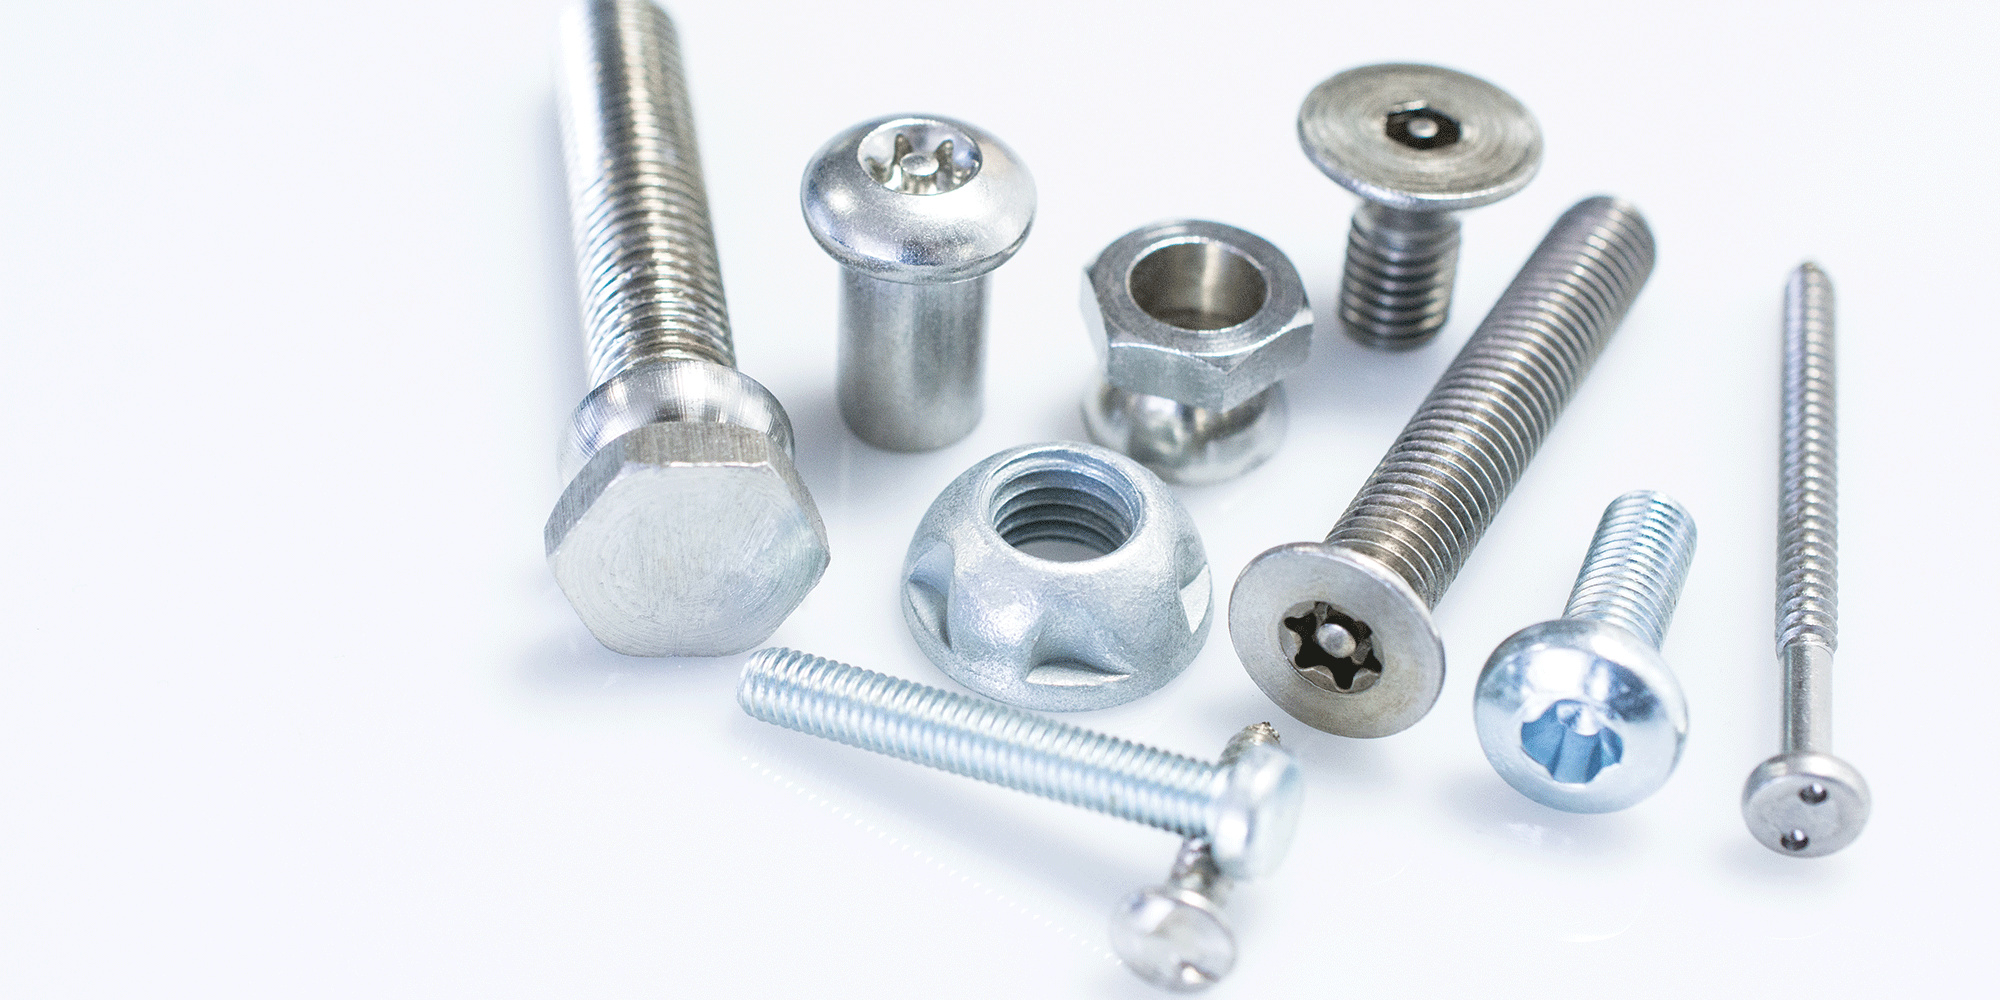 Security fasteners